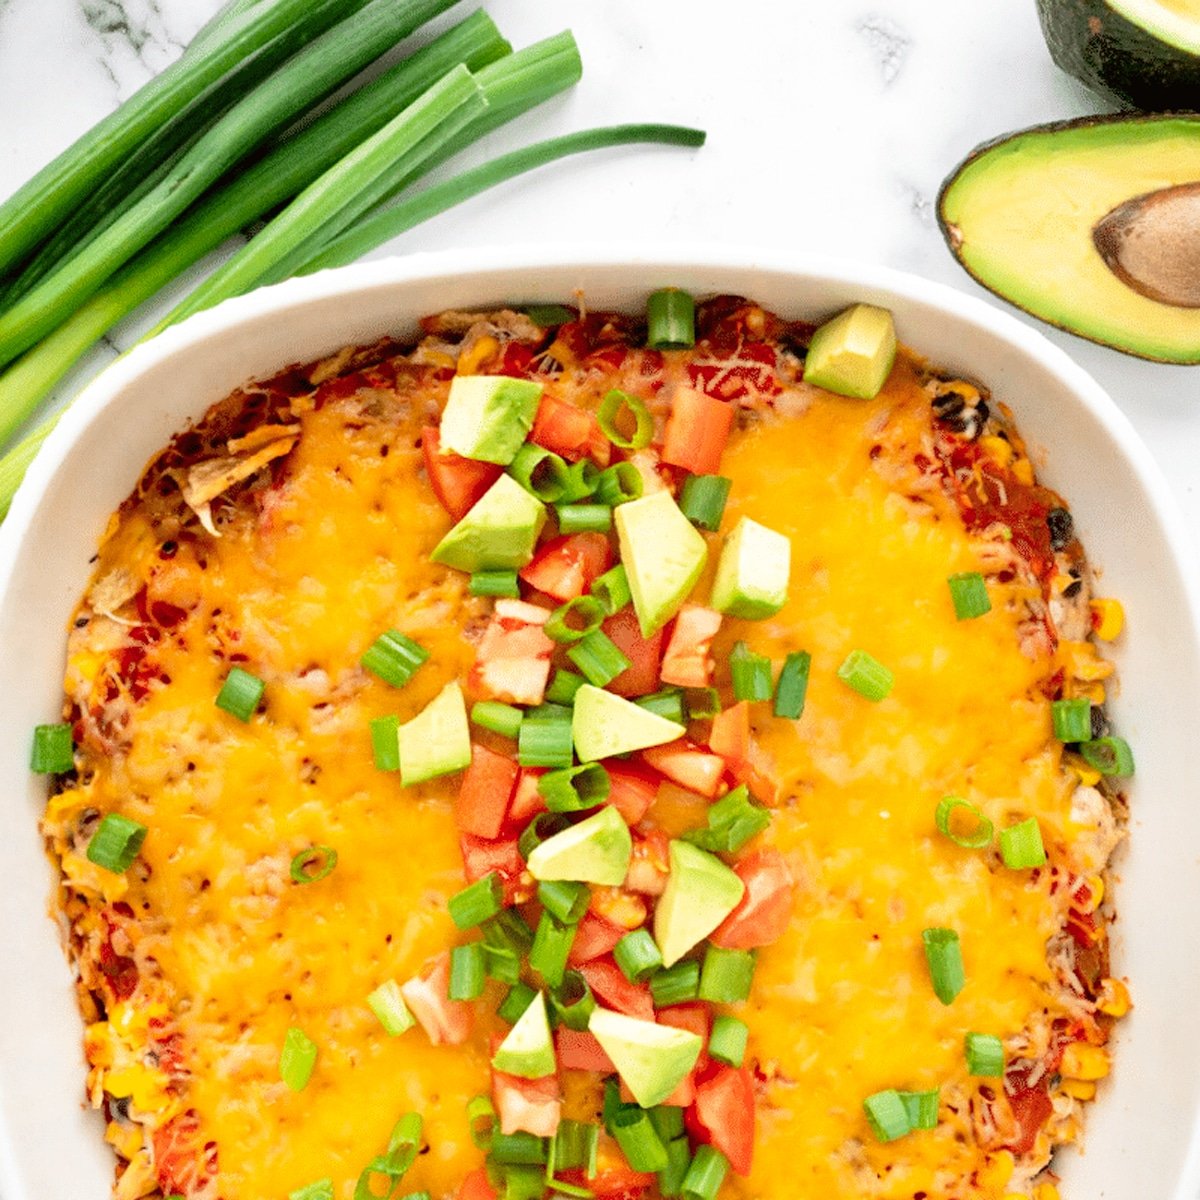 White casserole dish containing mexican casserole topped with green onions, tomato, and avocado.